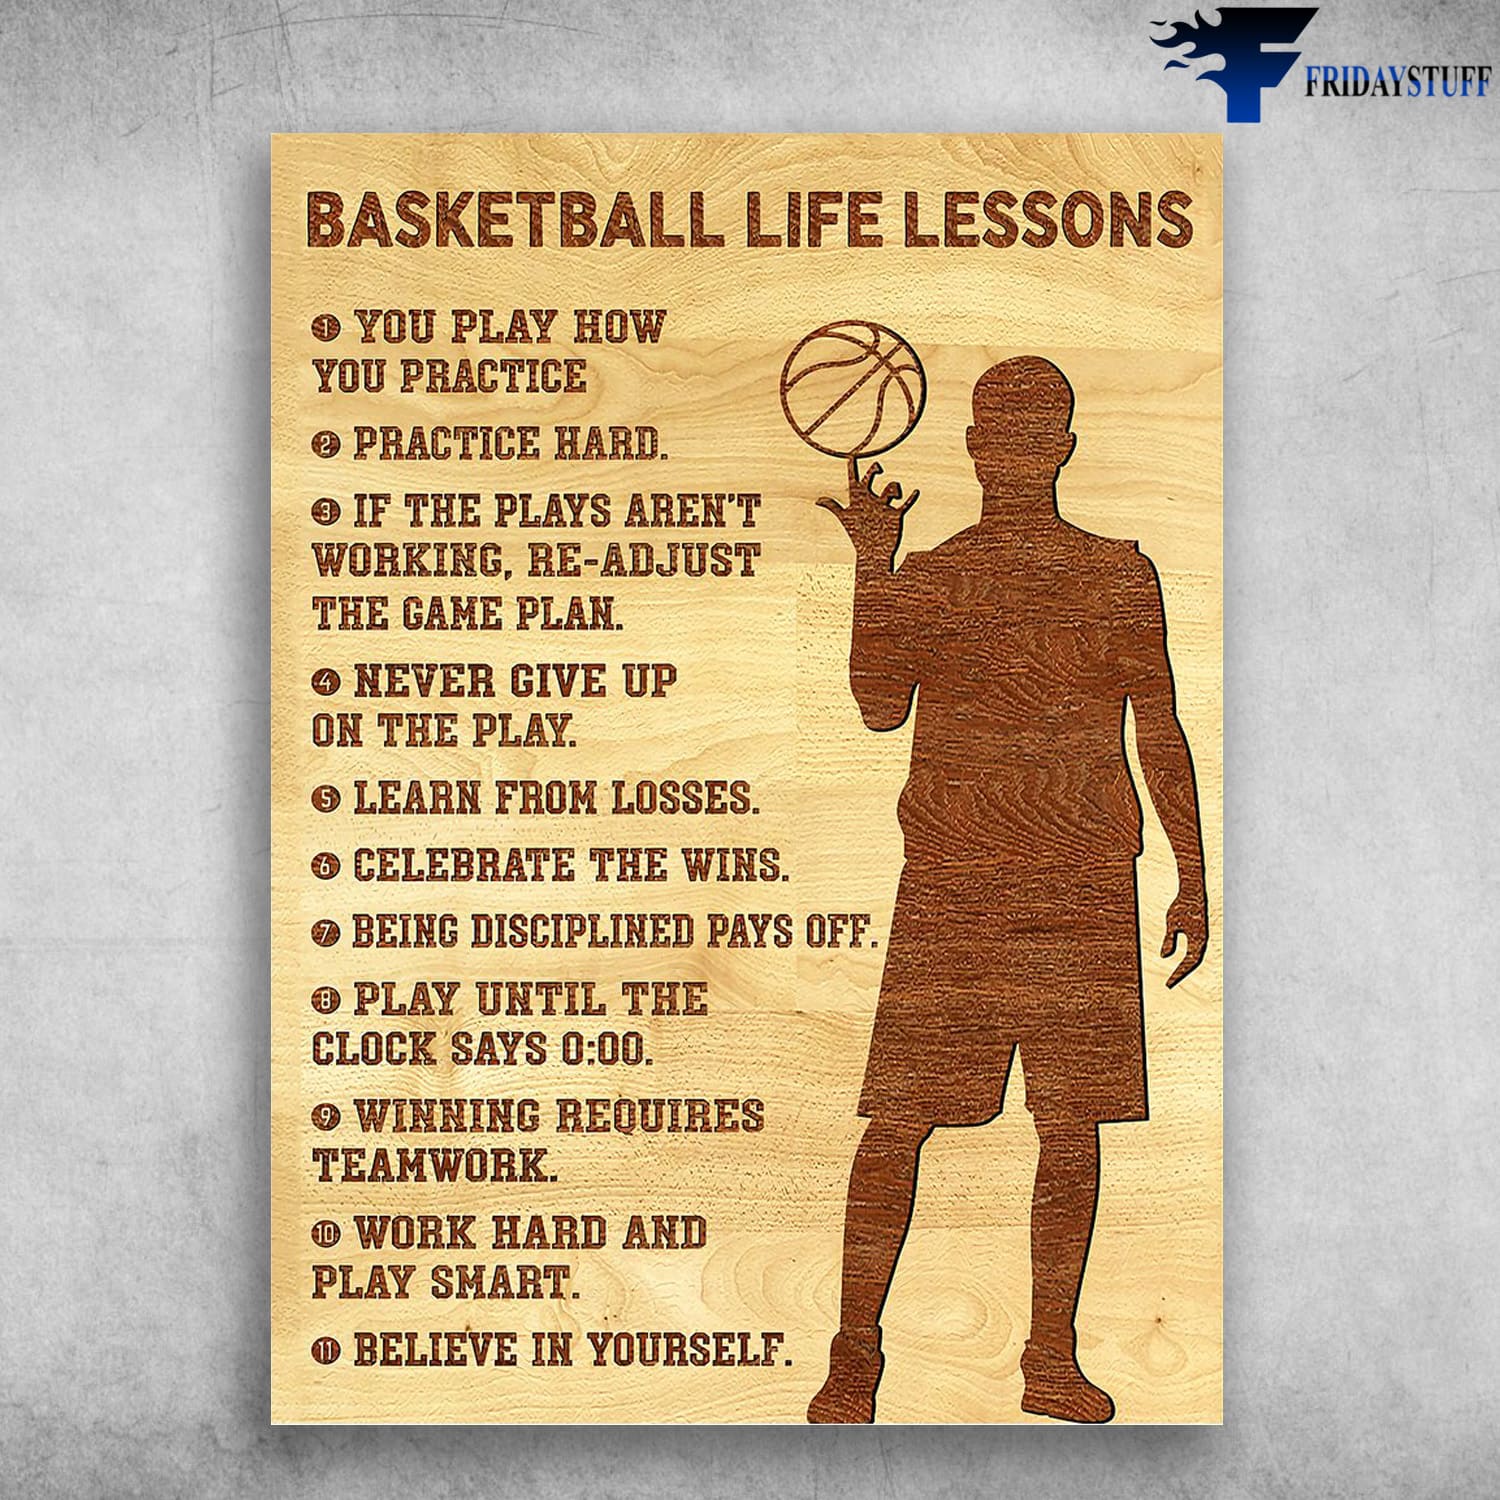 Basketball Life Lessons, You Play How You Practice, Practice Hard, If The Plays Aren't Working, Re-Adjust The Game Plan